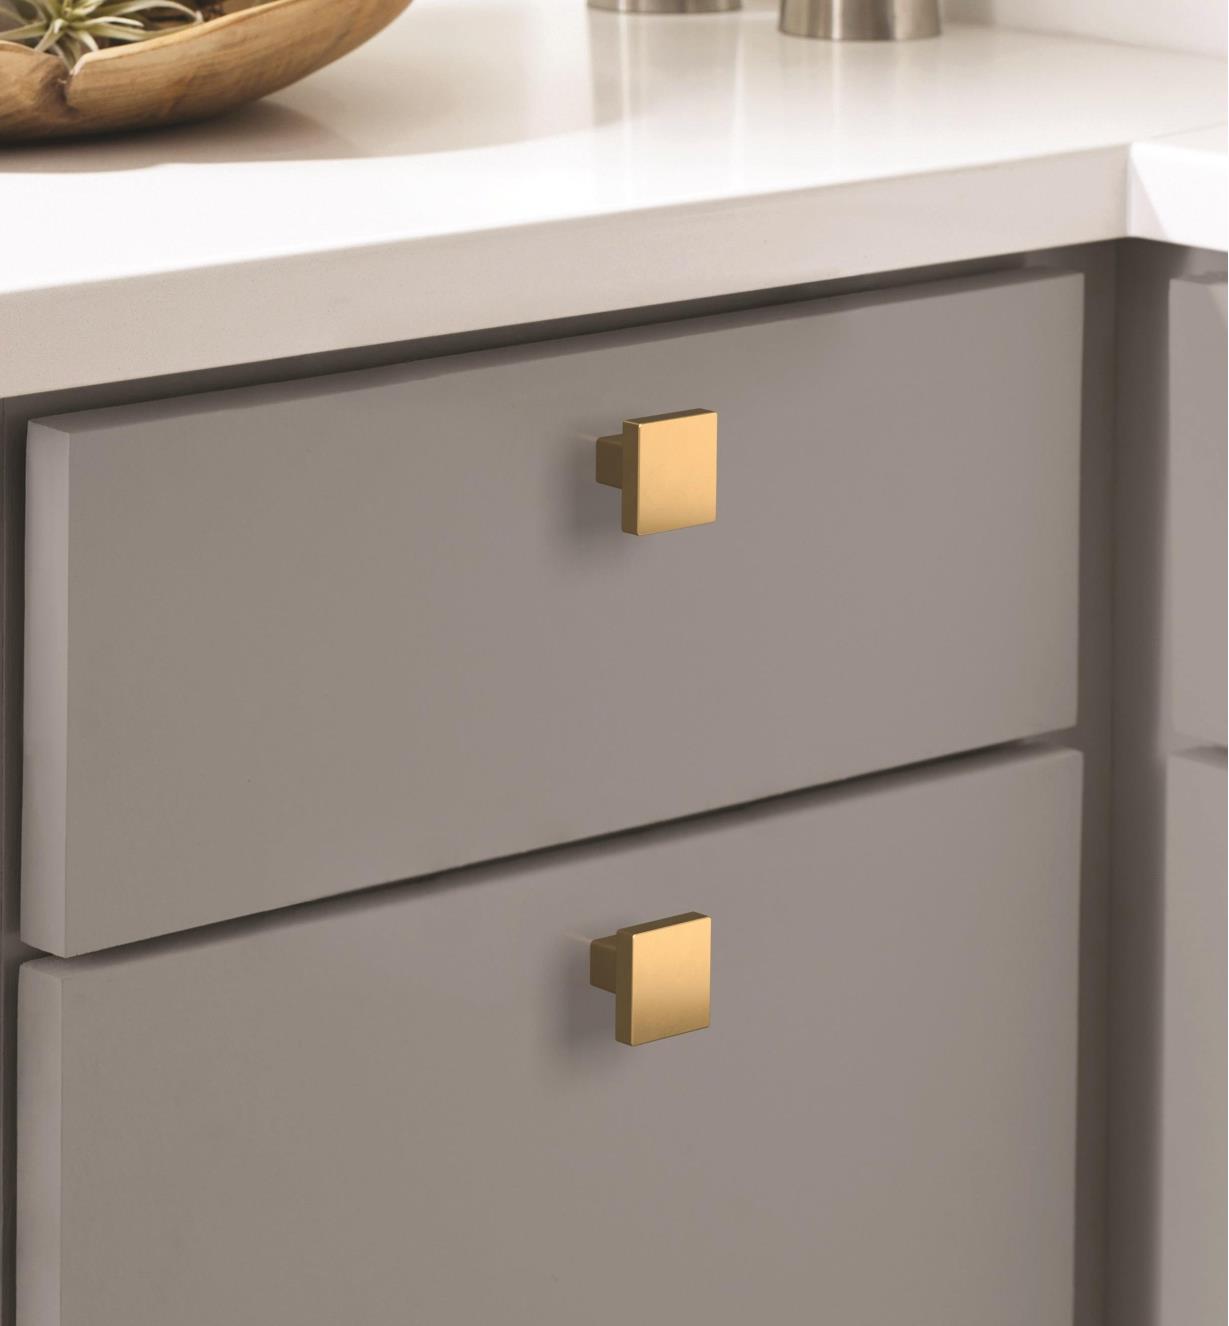 Two champagne bronze Monument square knobs mounted on two drawers